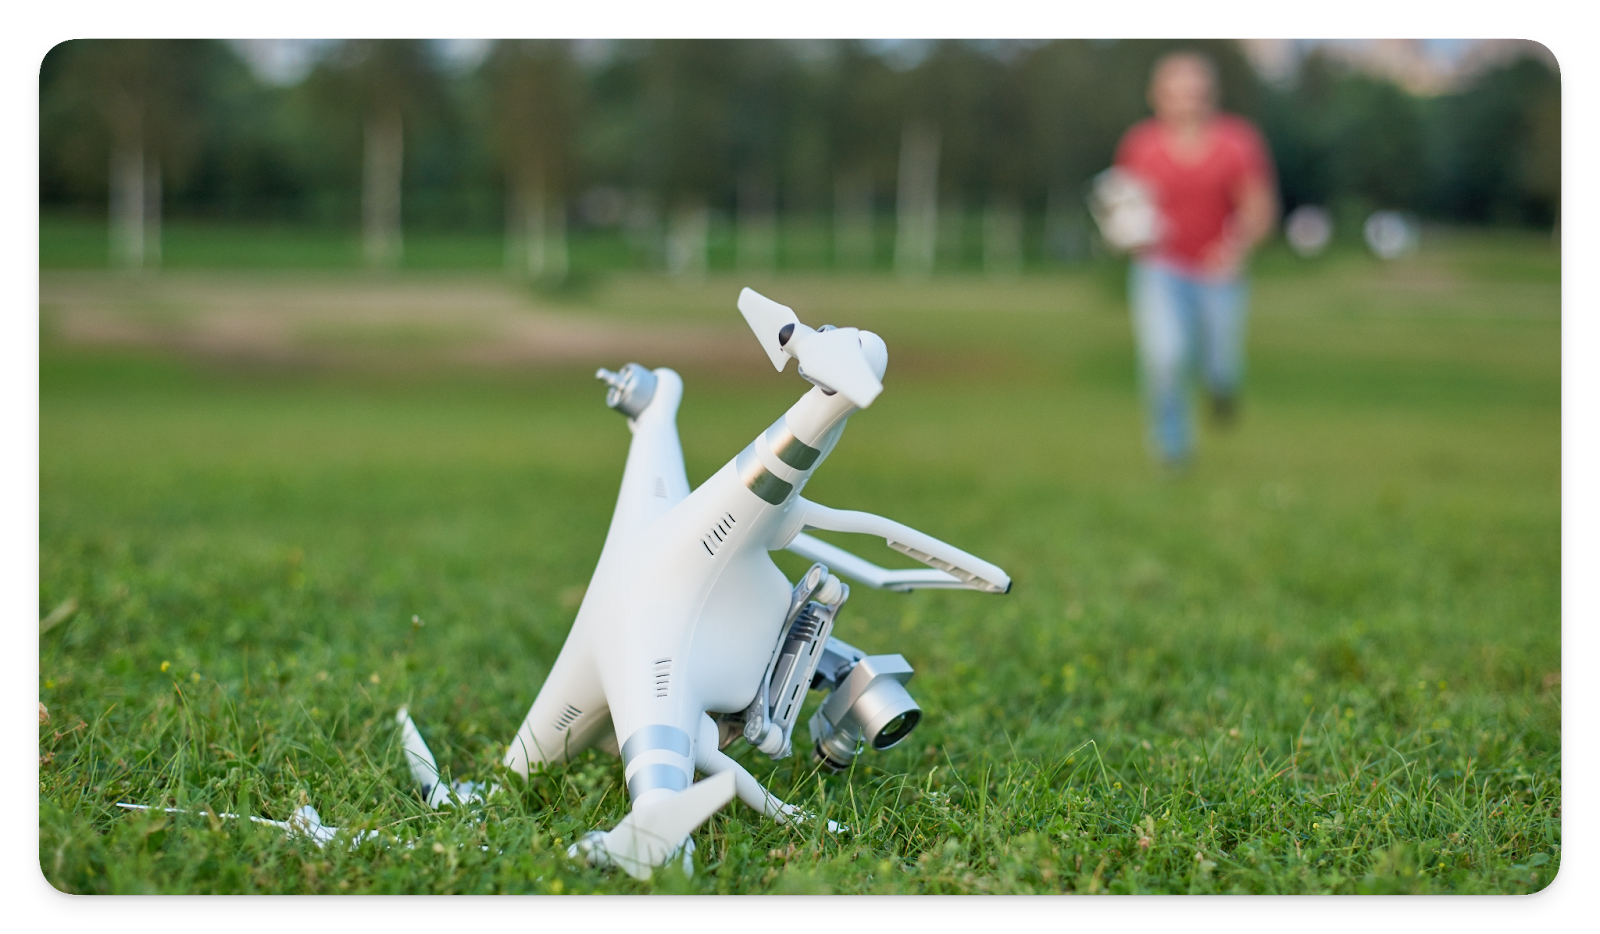 A crashed drone in a field.